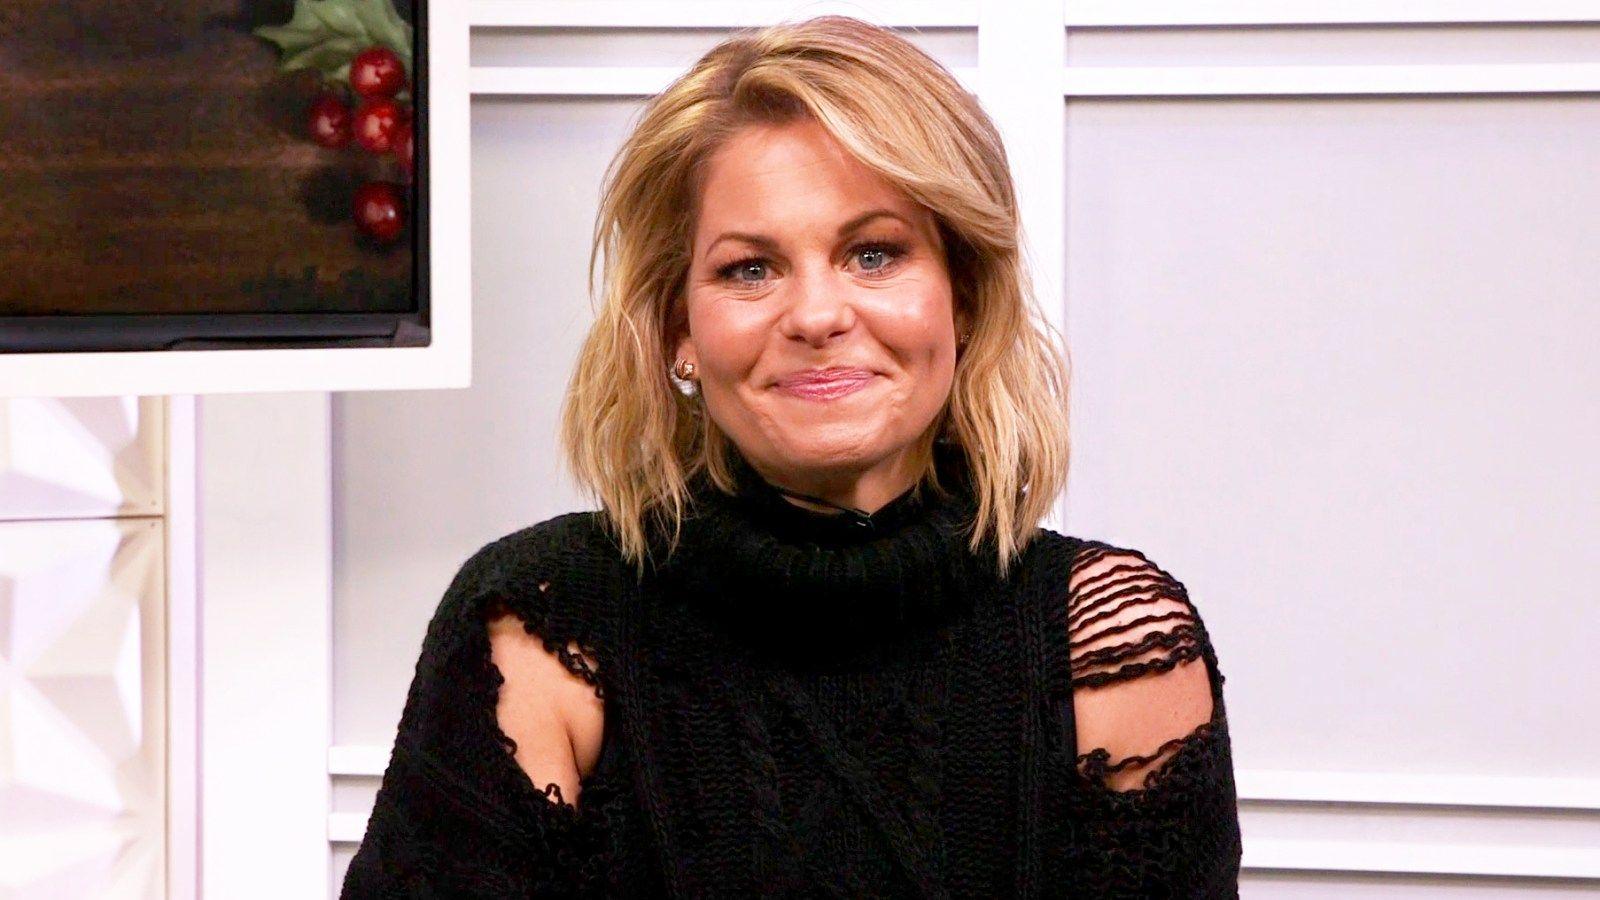 Candace Cameron Bure Is OK With Politics At the Dinner Table